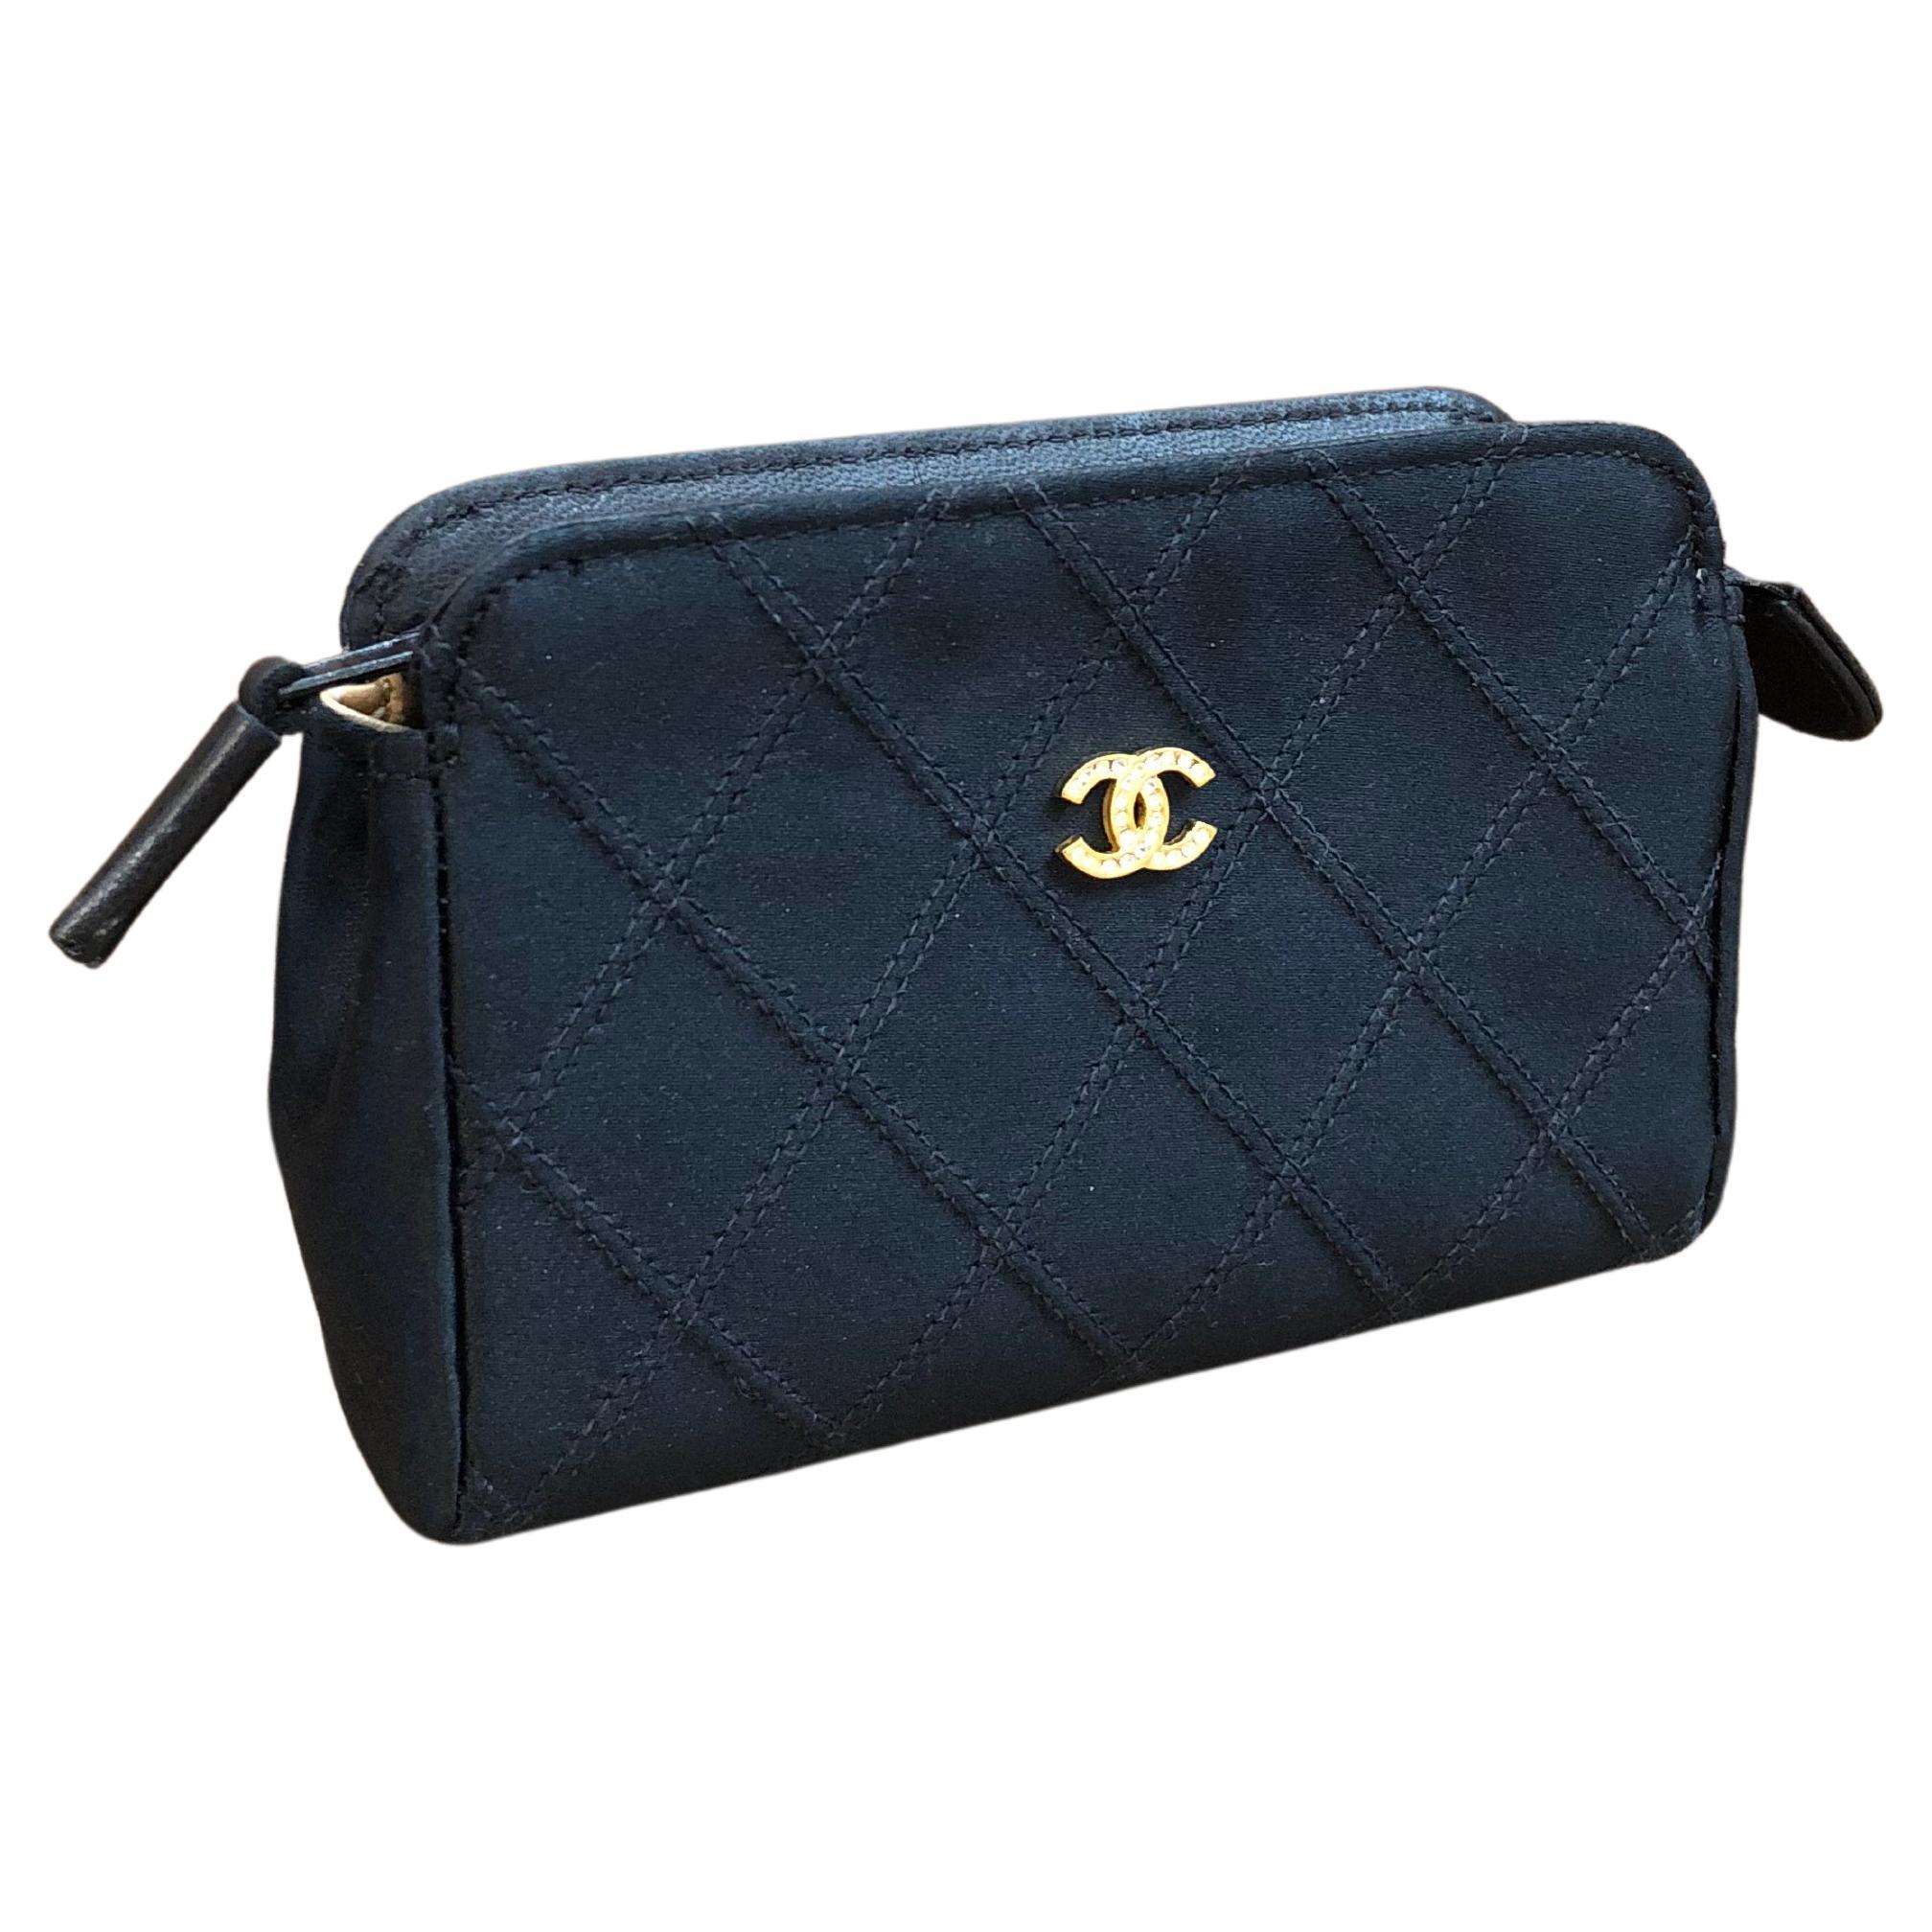 Vintage CHANEL Quilted Satin Mini Pouch Bag Black